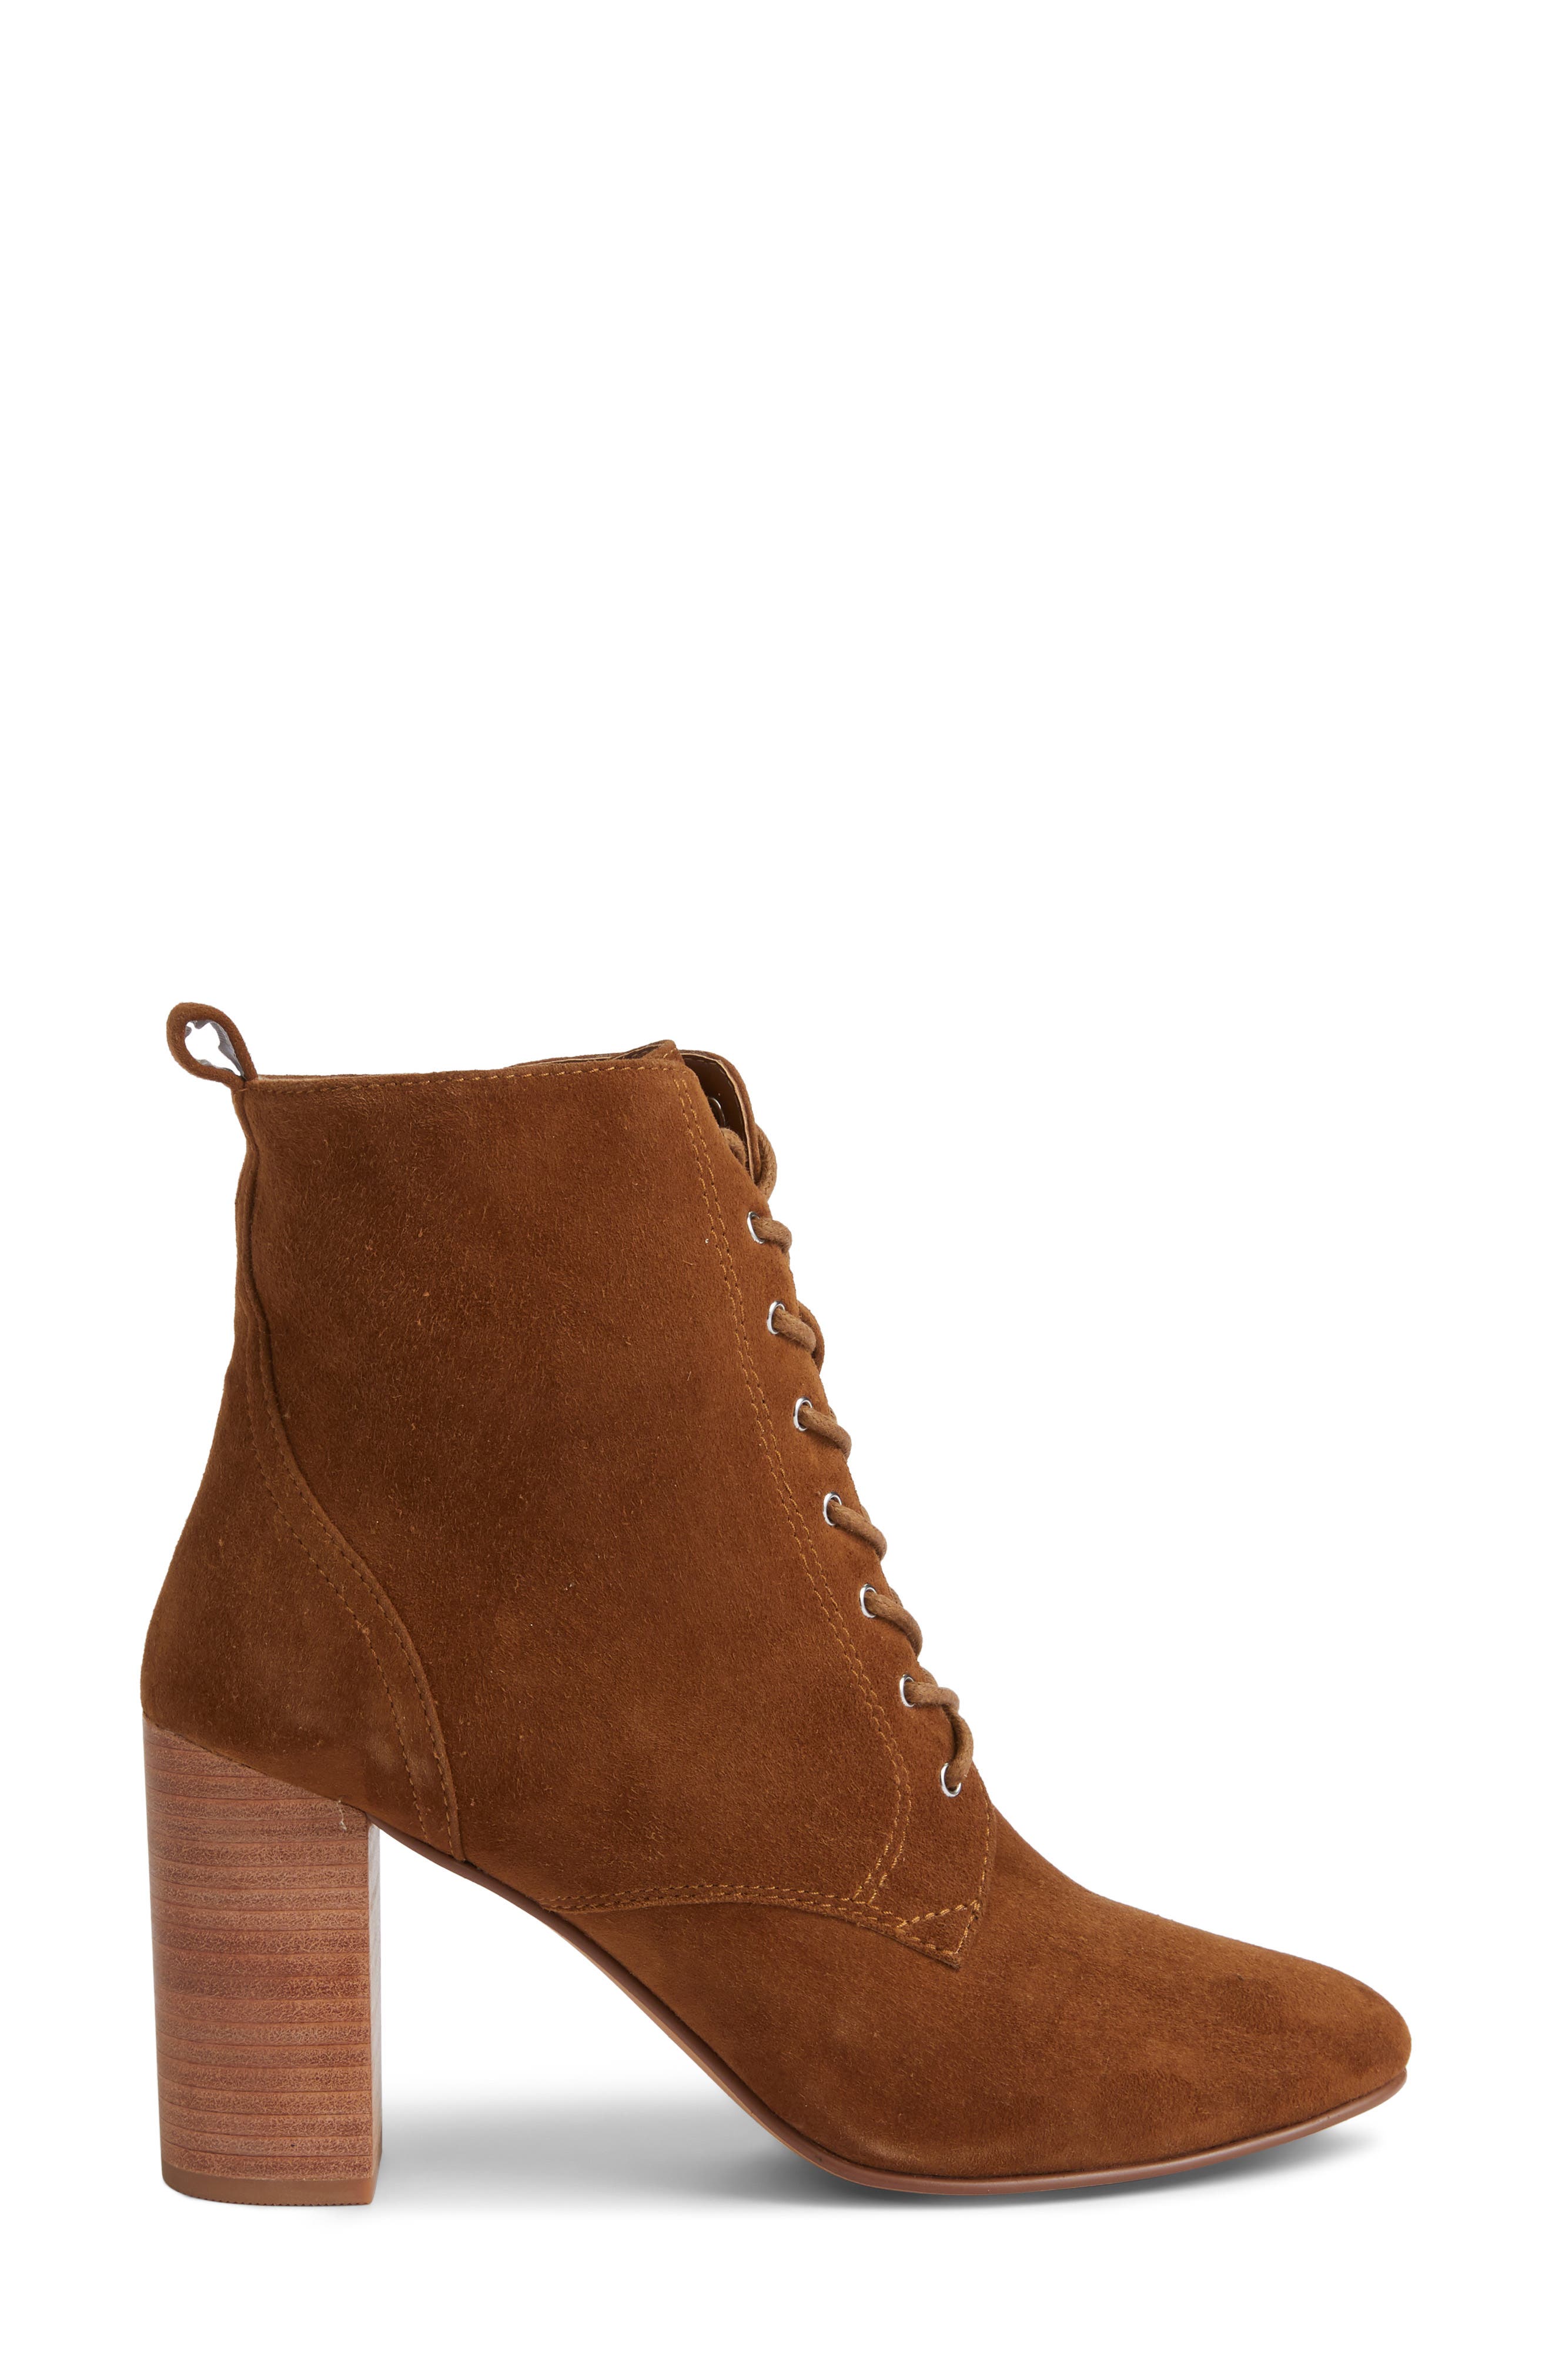 treasure and bond gram lace up bootie